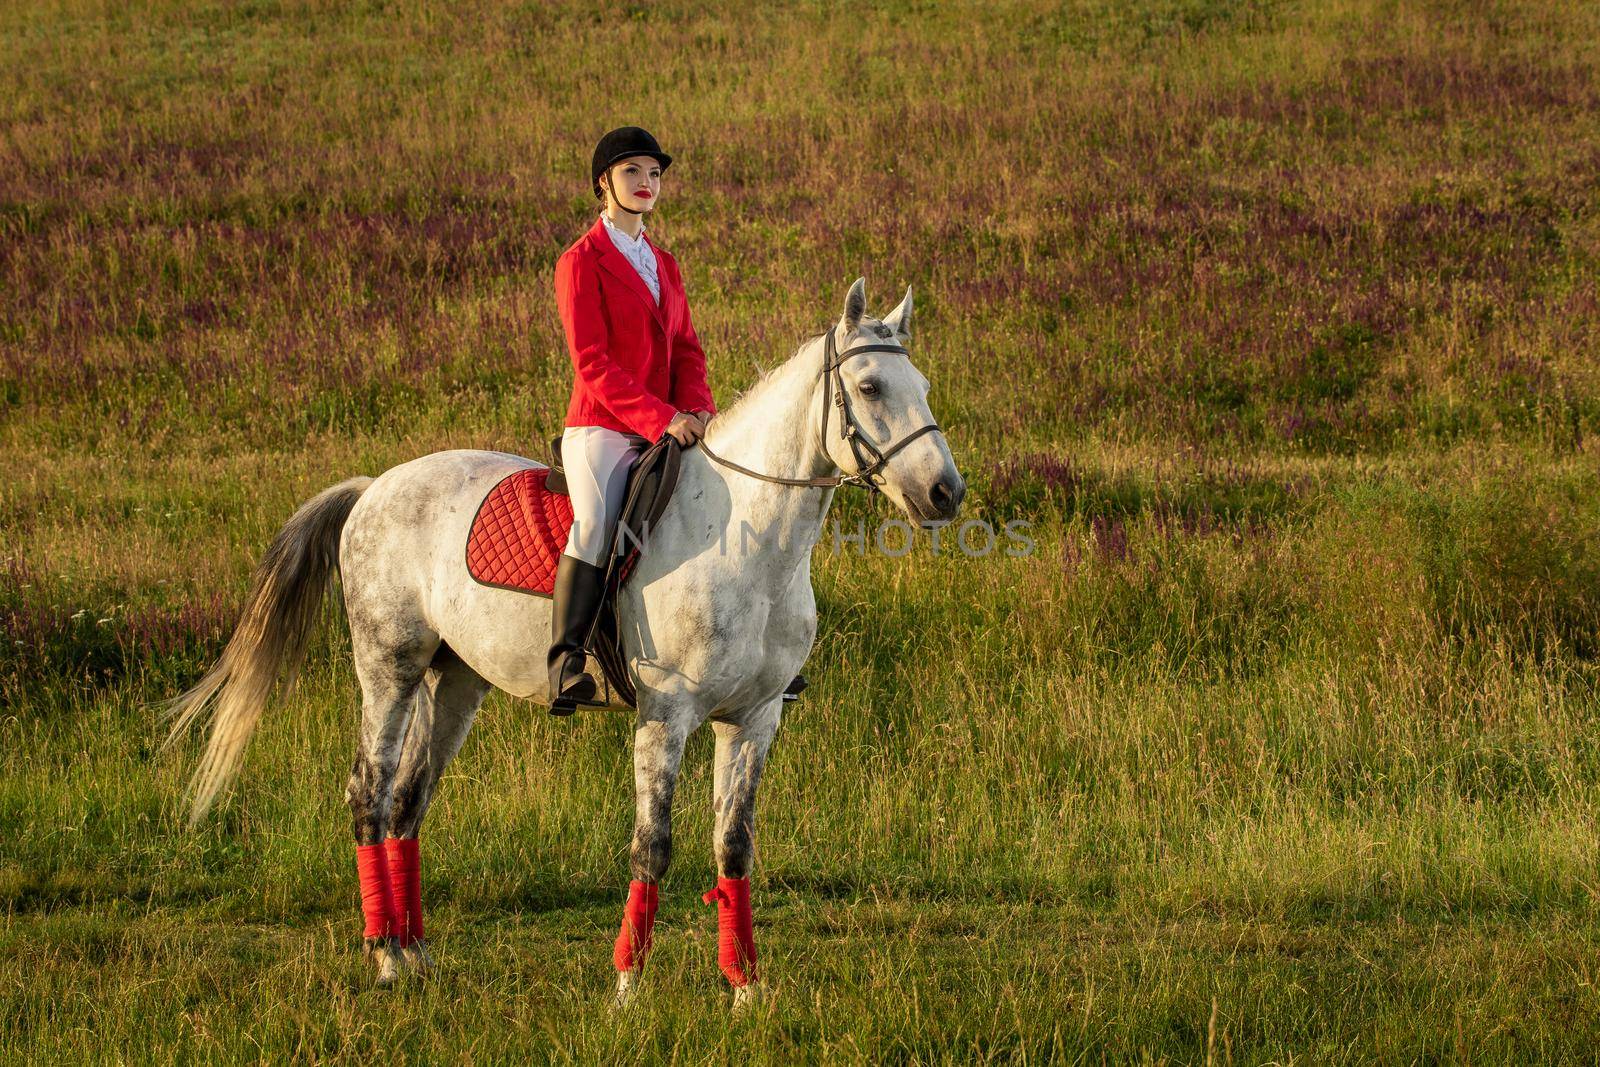 The sportswoman on a horse. The horsewoman on a red horse. Equestrianism. Horse riding racing. Rider on a horse.